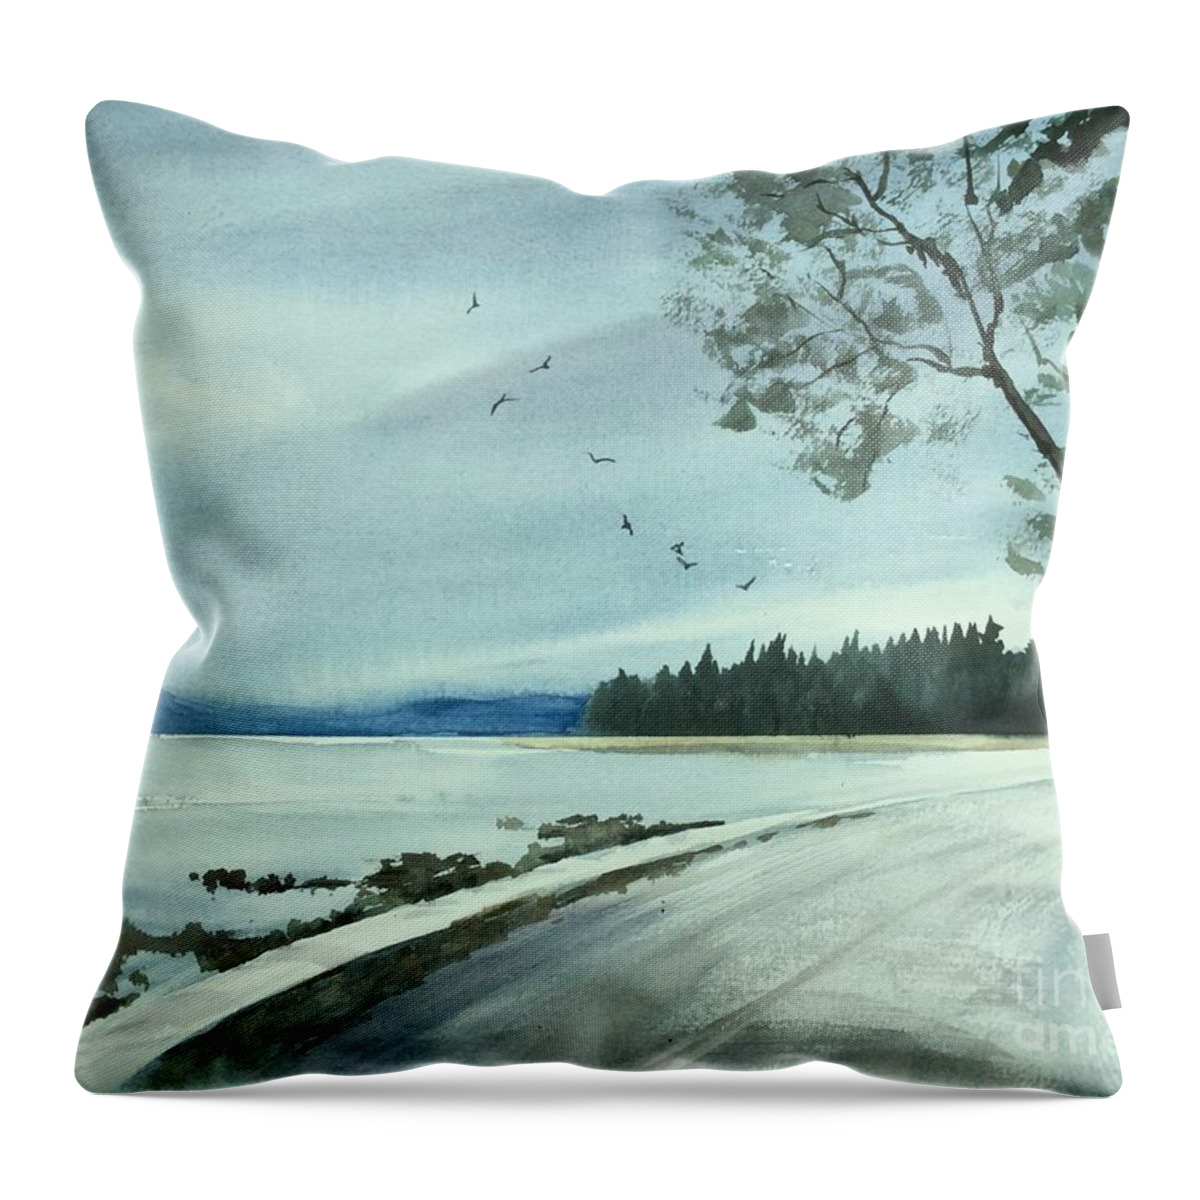 English Bay Throw Pillow featuring the painting English Bay Seawall by Watercolor Meditations